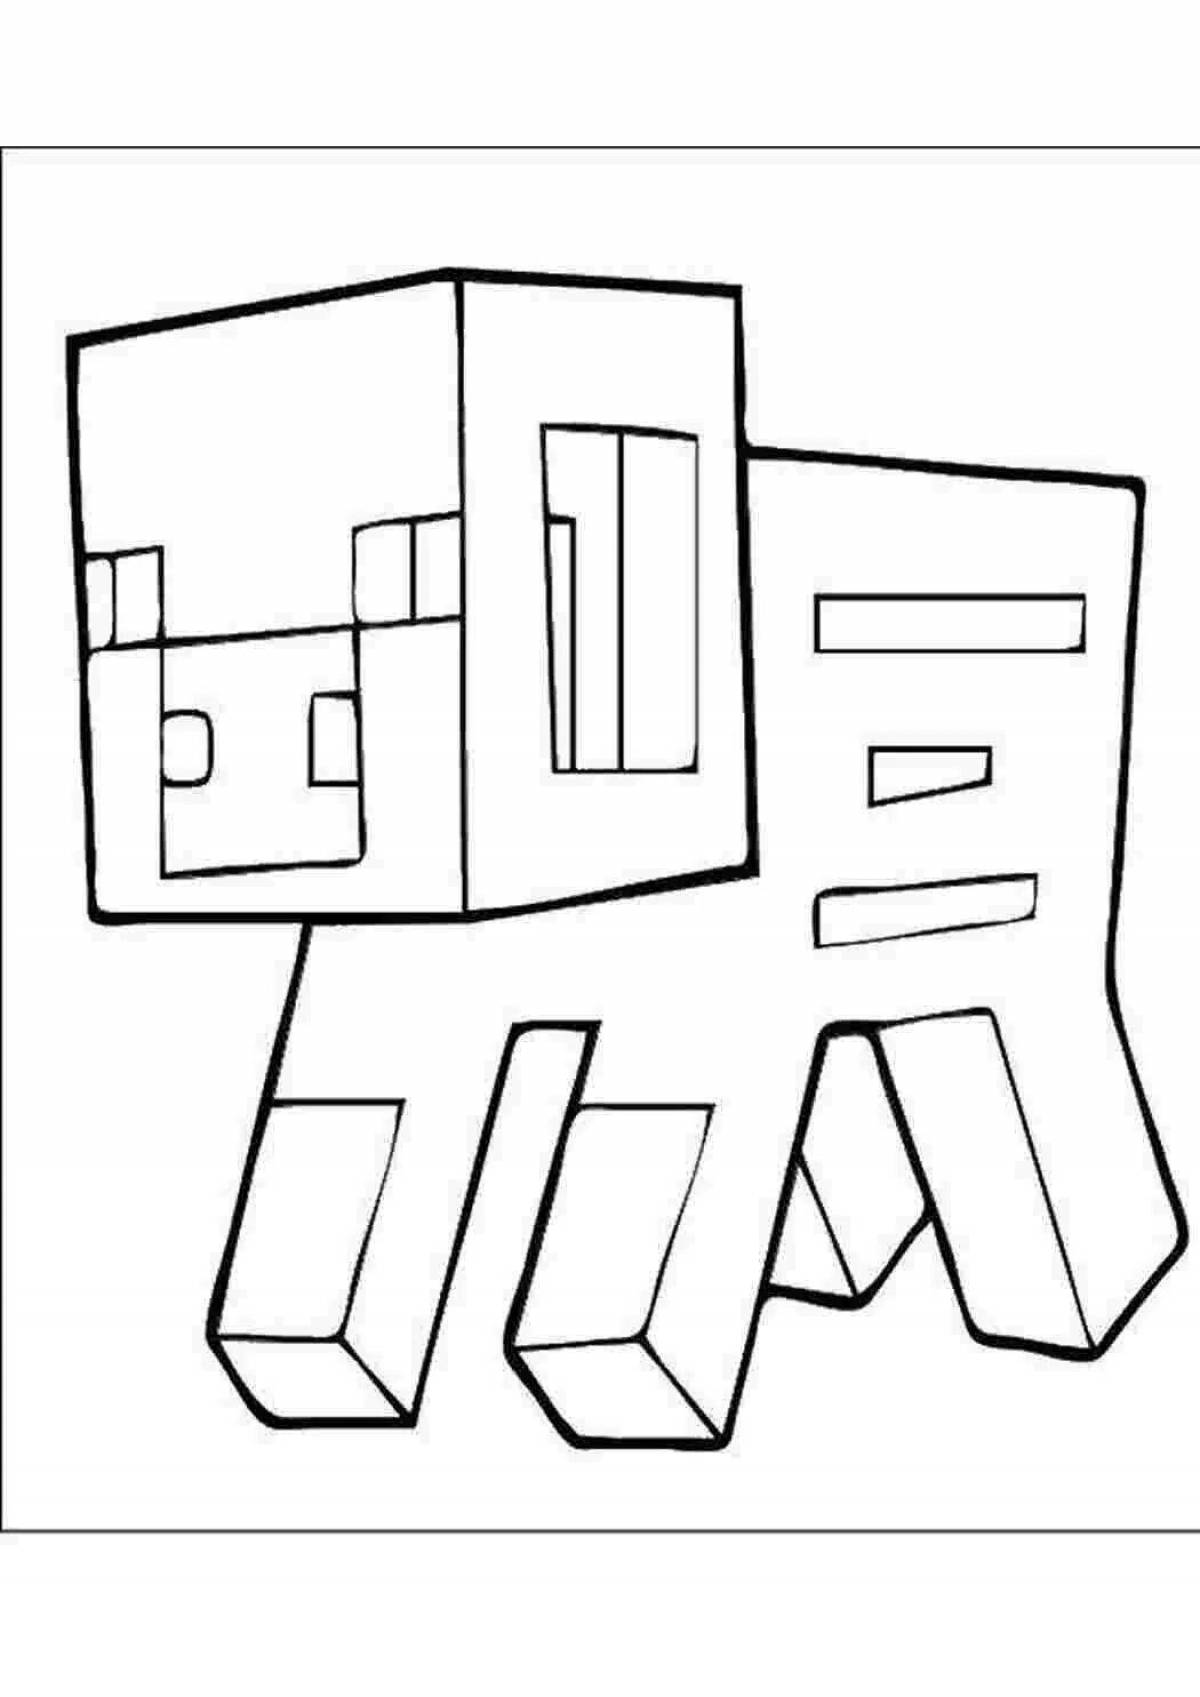 Creative minecraft cover coloring page